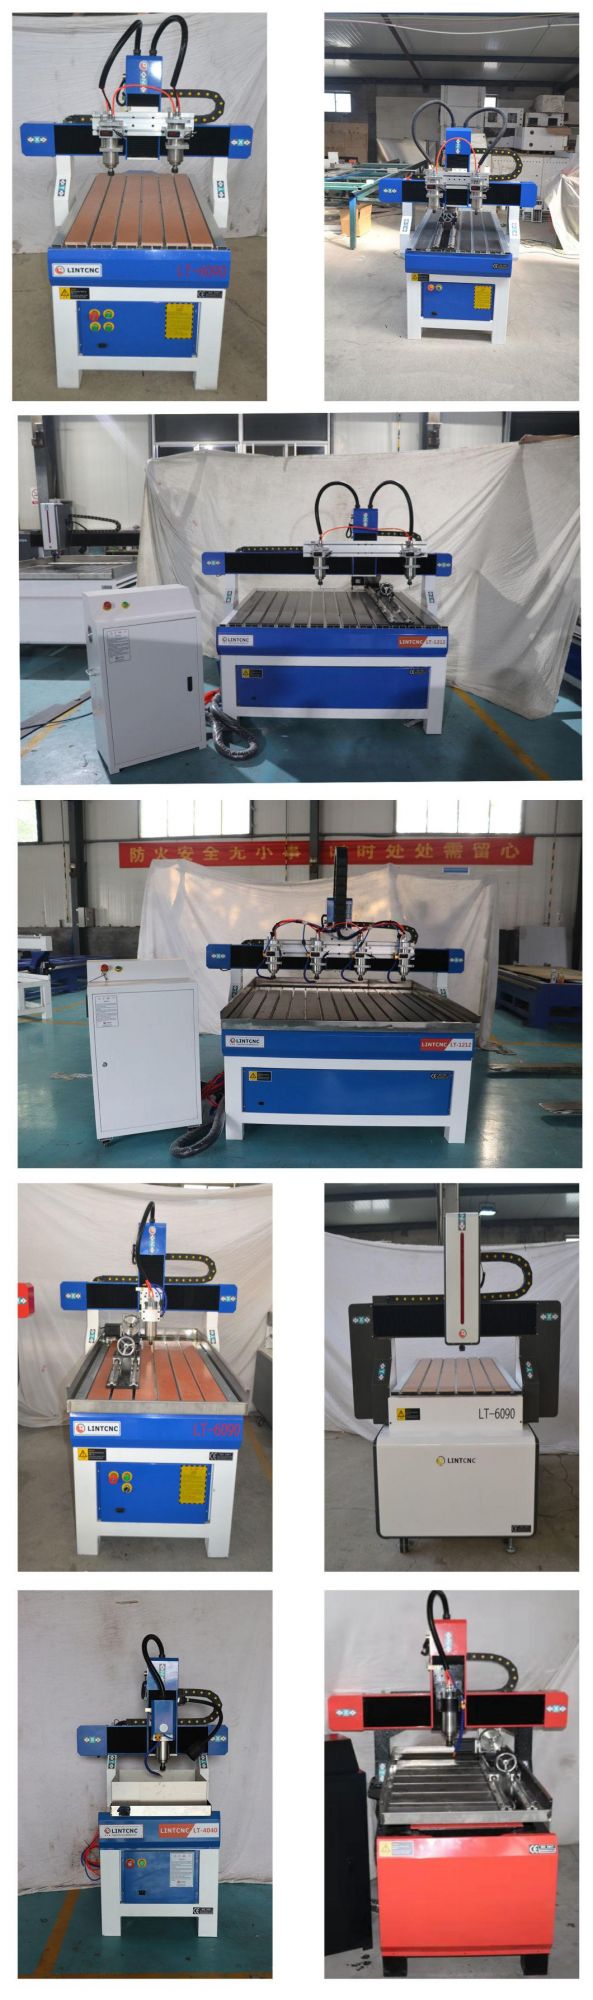 China 4040 CNC Milling Router Engraving Machine Metal Mould CNC Router